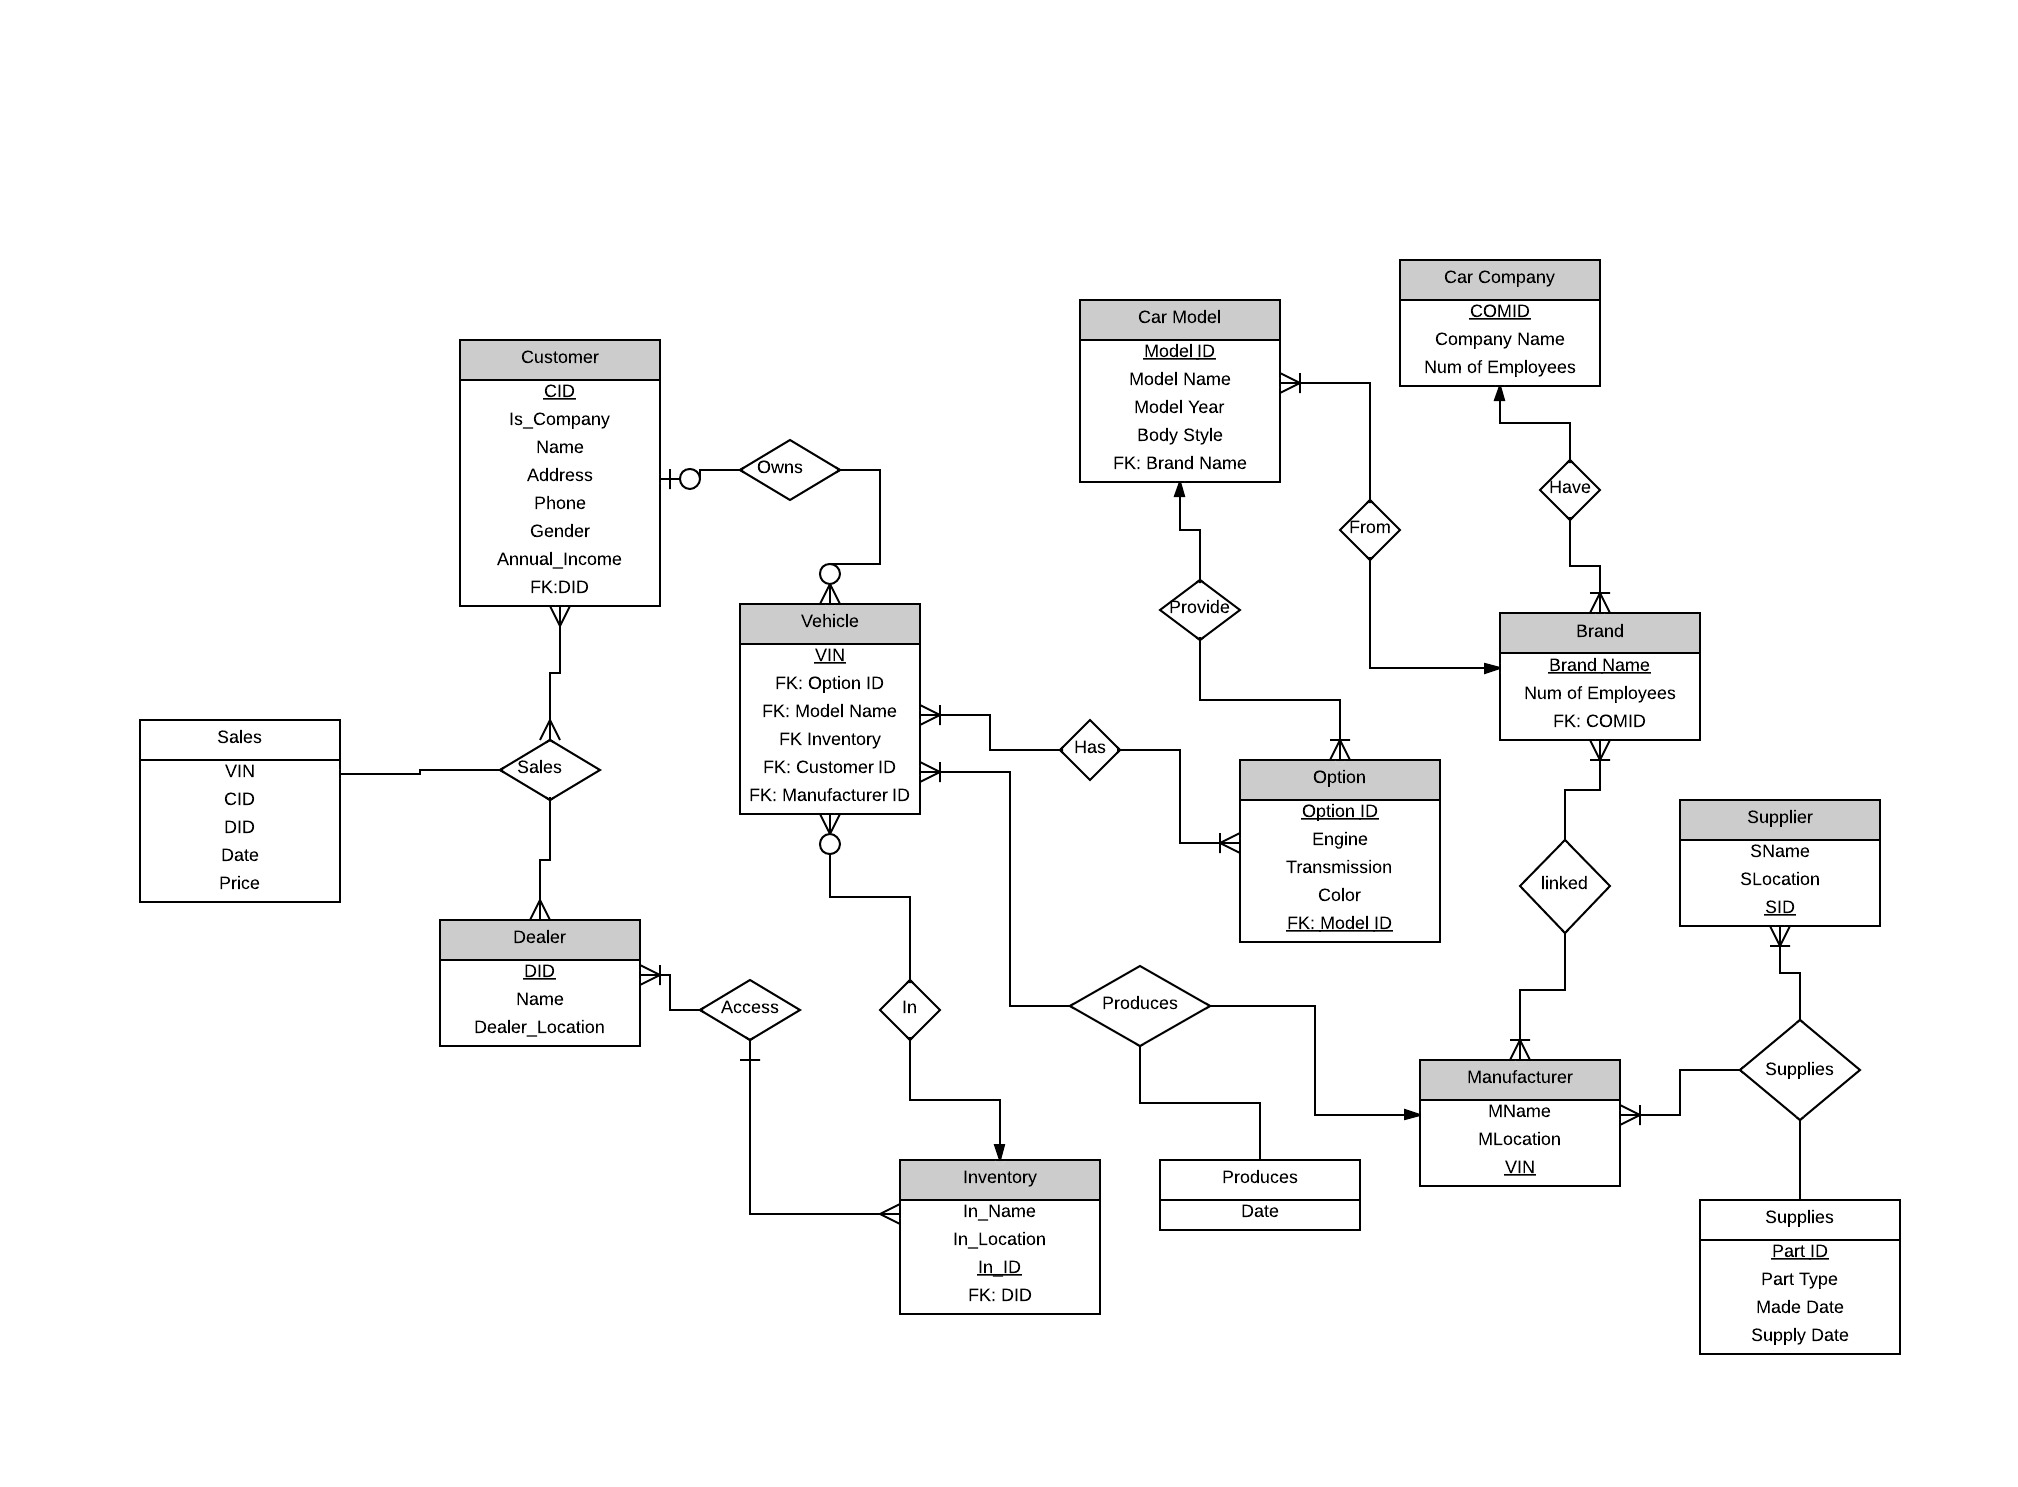 Need Help On An Er Diagram For An Automobile Company - Stack in An Er Diagram For Company Database